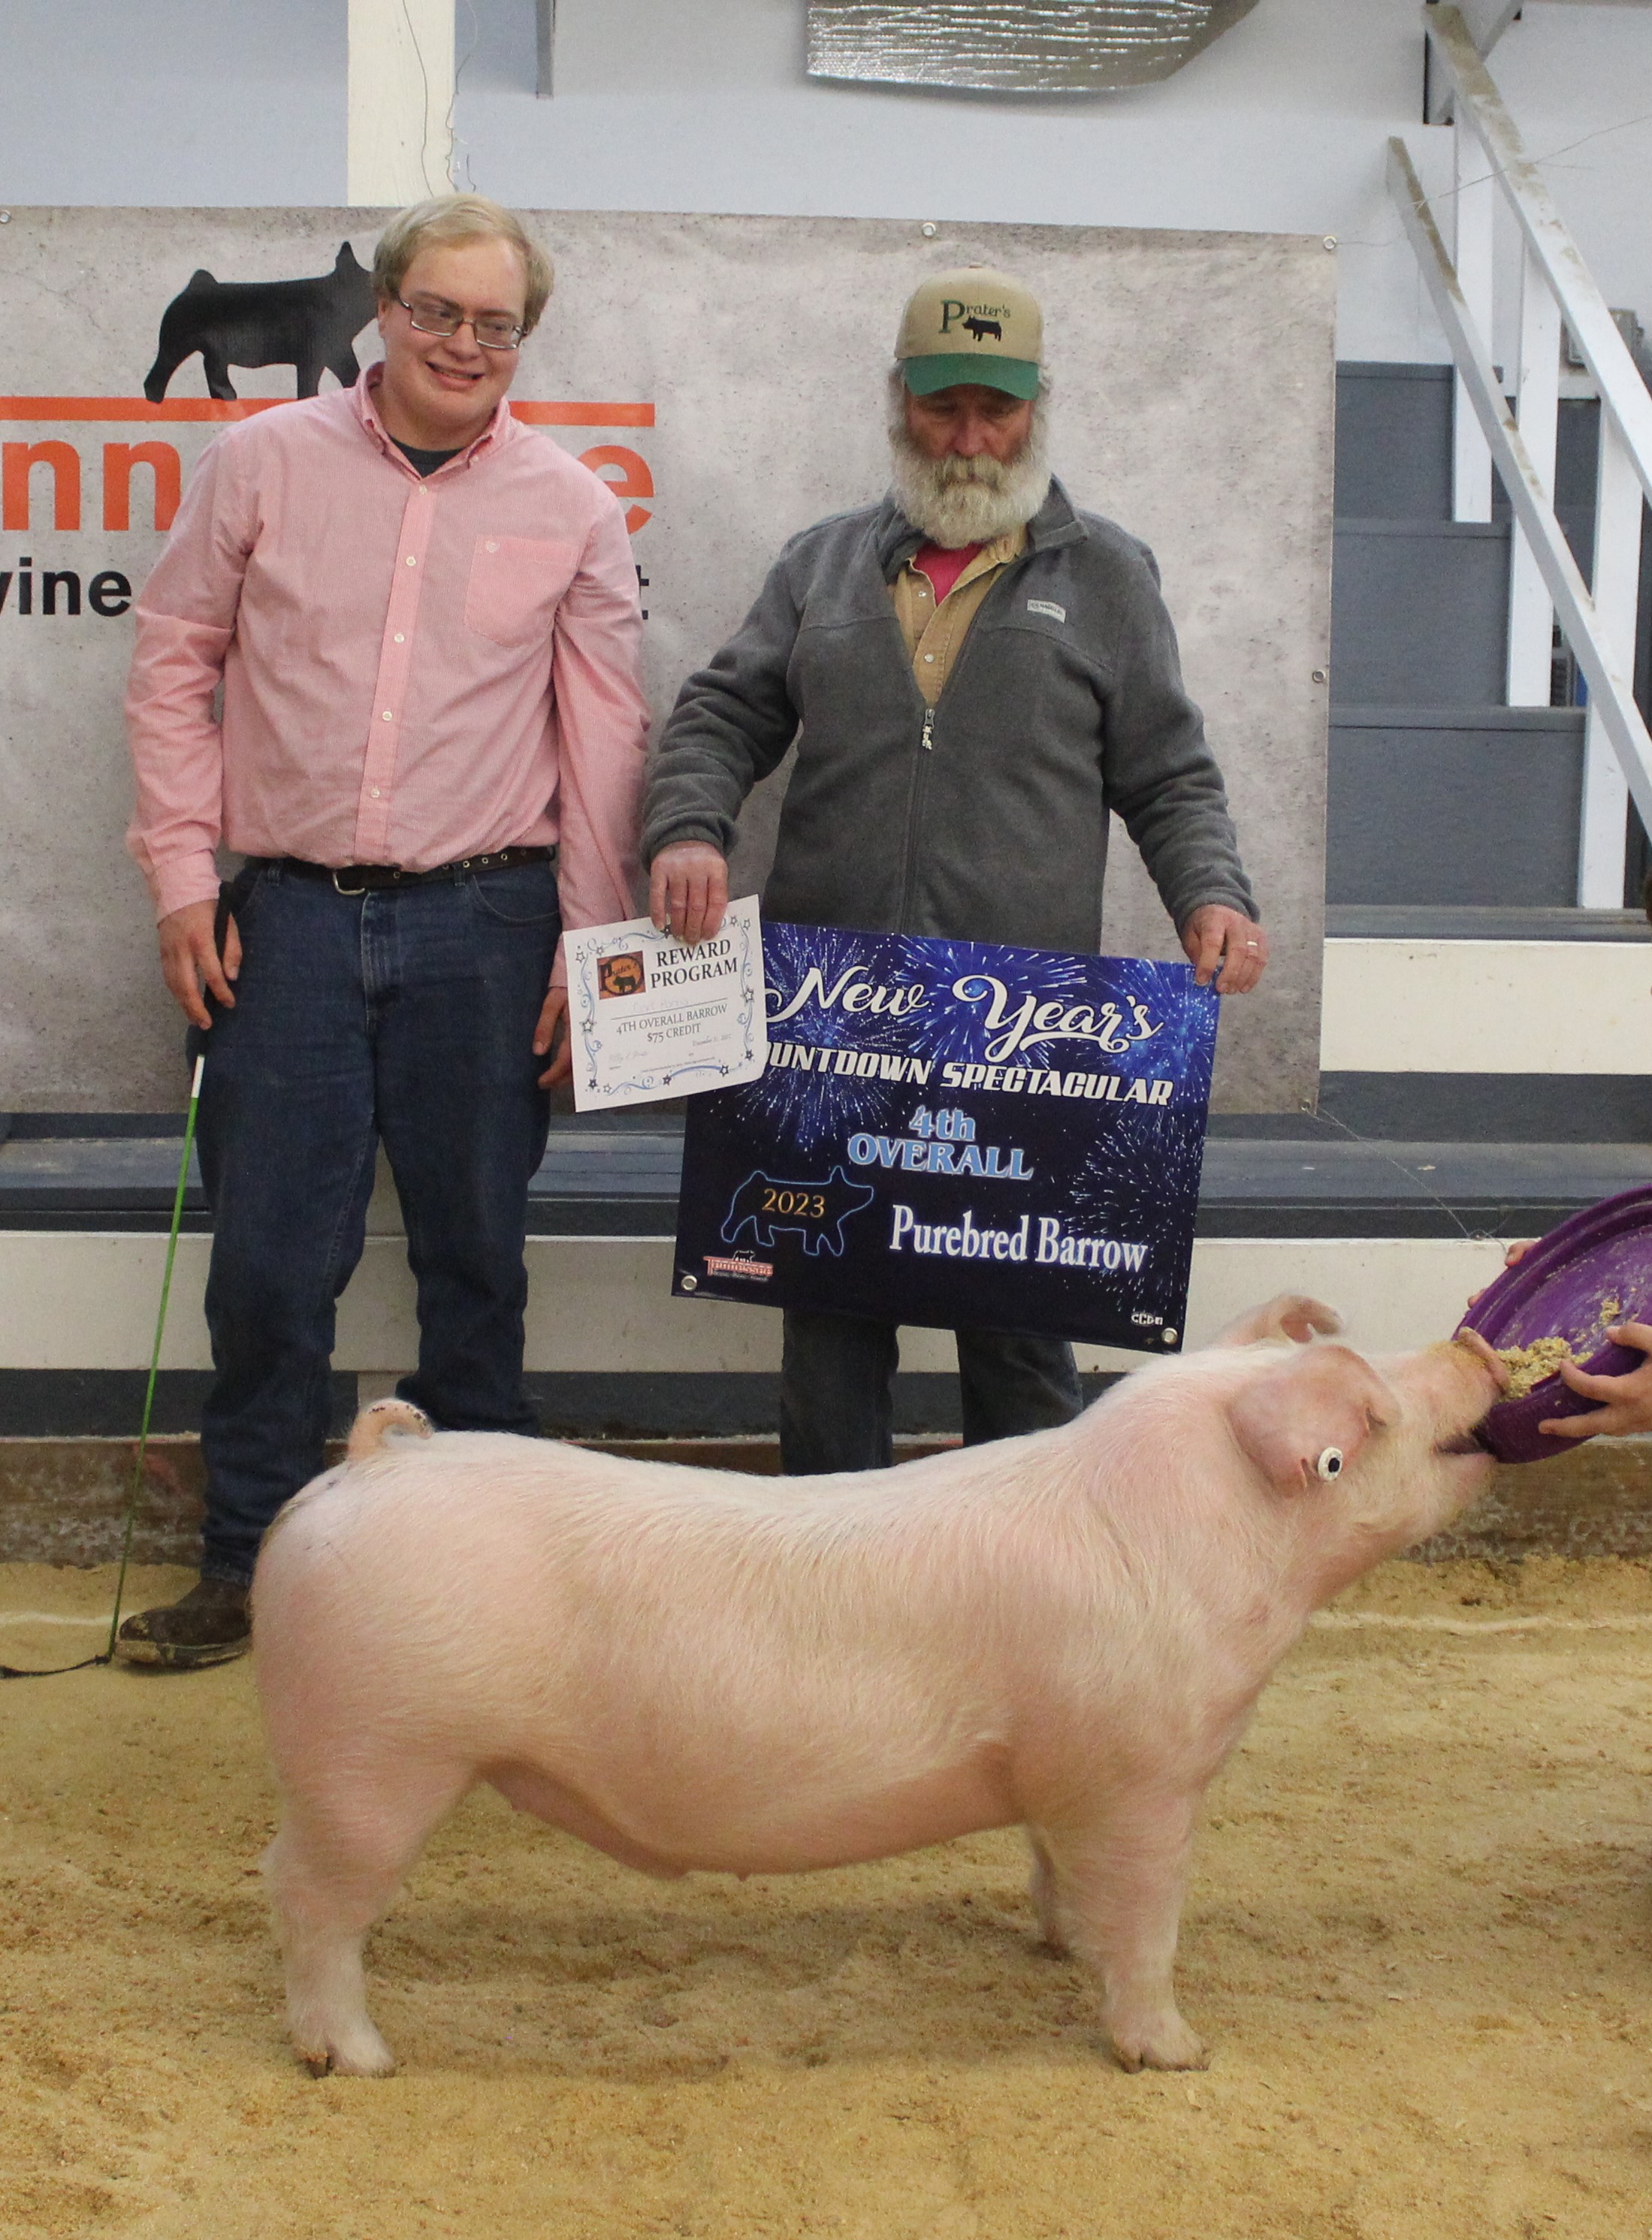 Carl Parris
2022 New Year's Countdown Spectacular
Day 1 - Champion Chester White Barrow
Champion TN Bred 
Chester White Barrow
Day 2 - Champion Chester White Barrow 
4th Overall Purebred Barrow